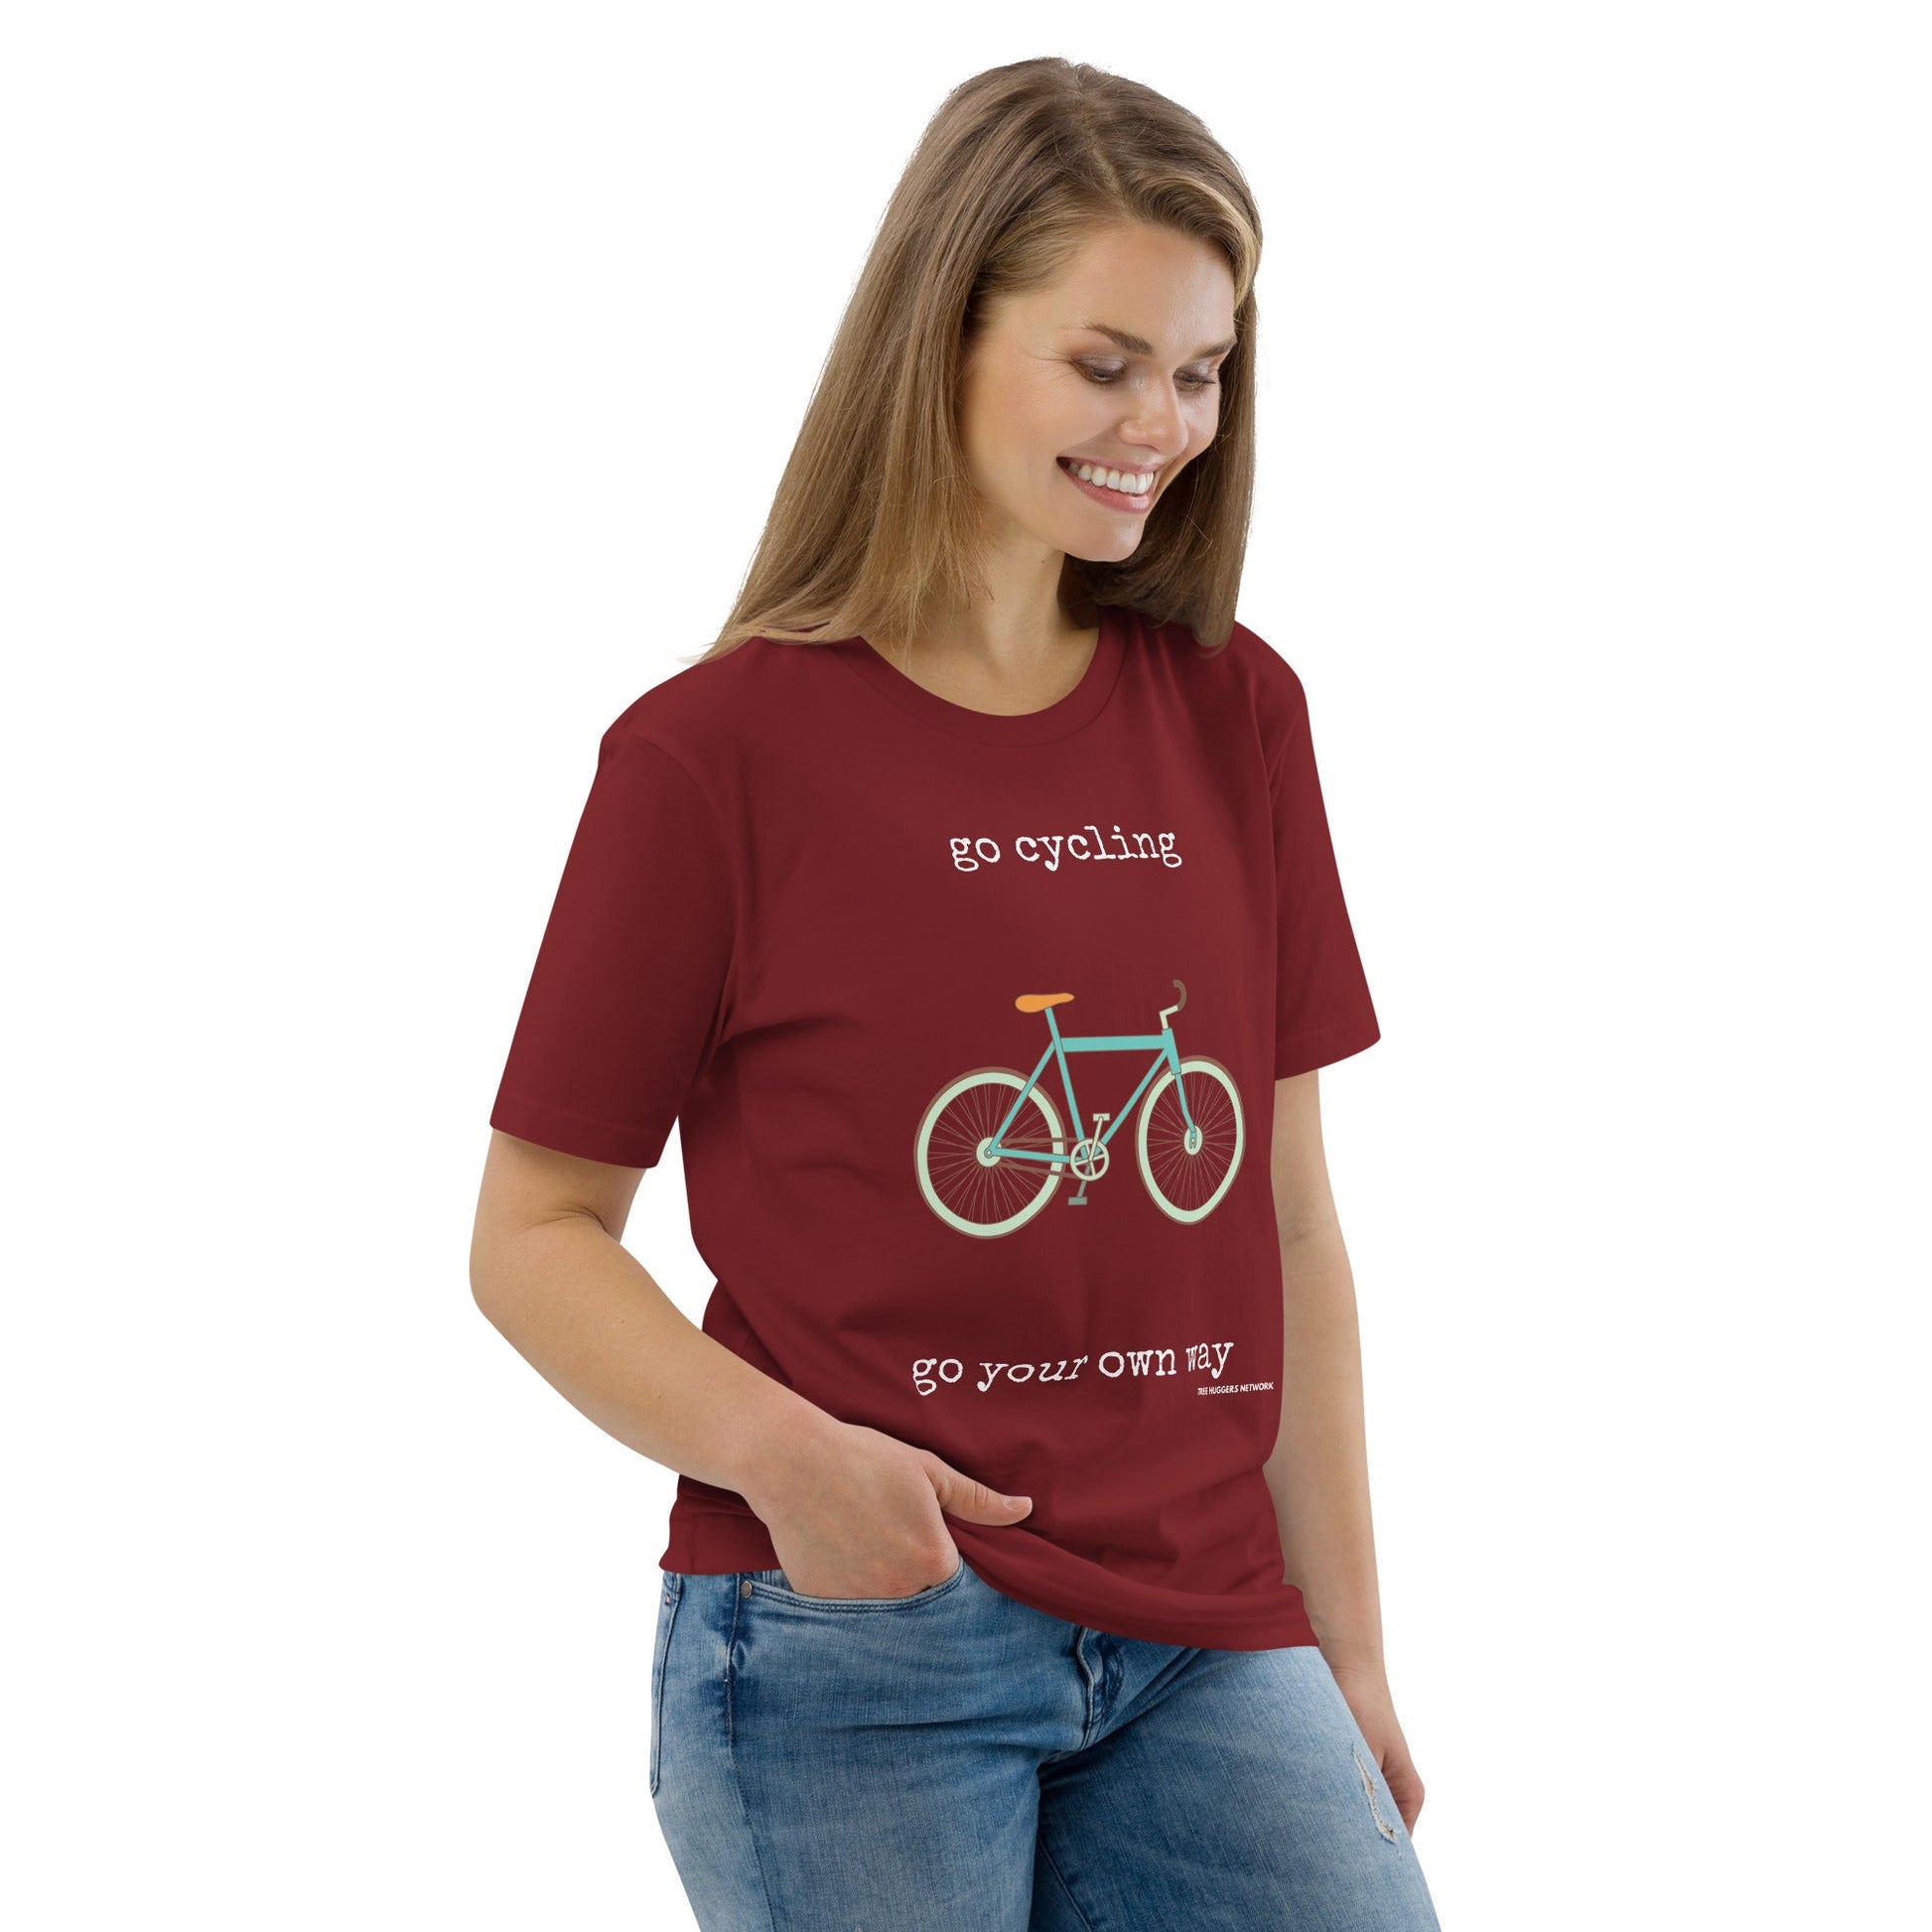 Unisex Organic Cotton T-shirt - go cycling, go your own way - Treehugger network